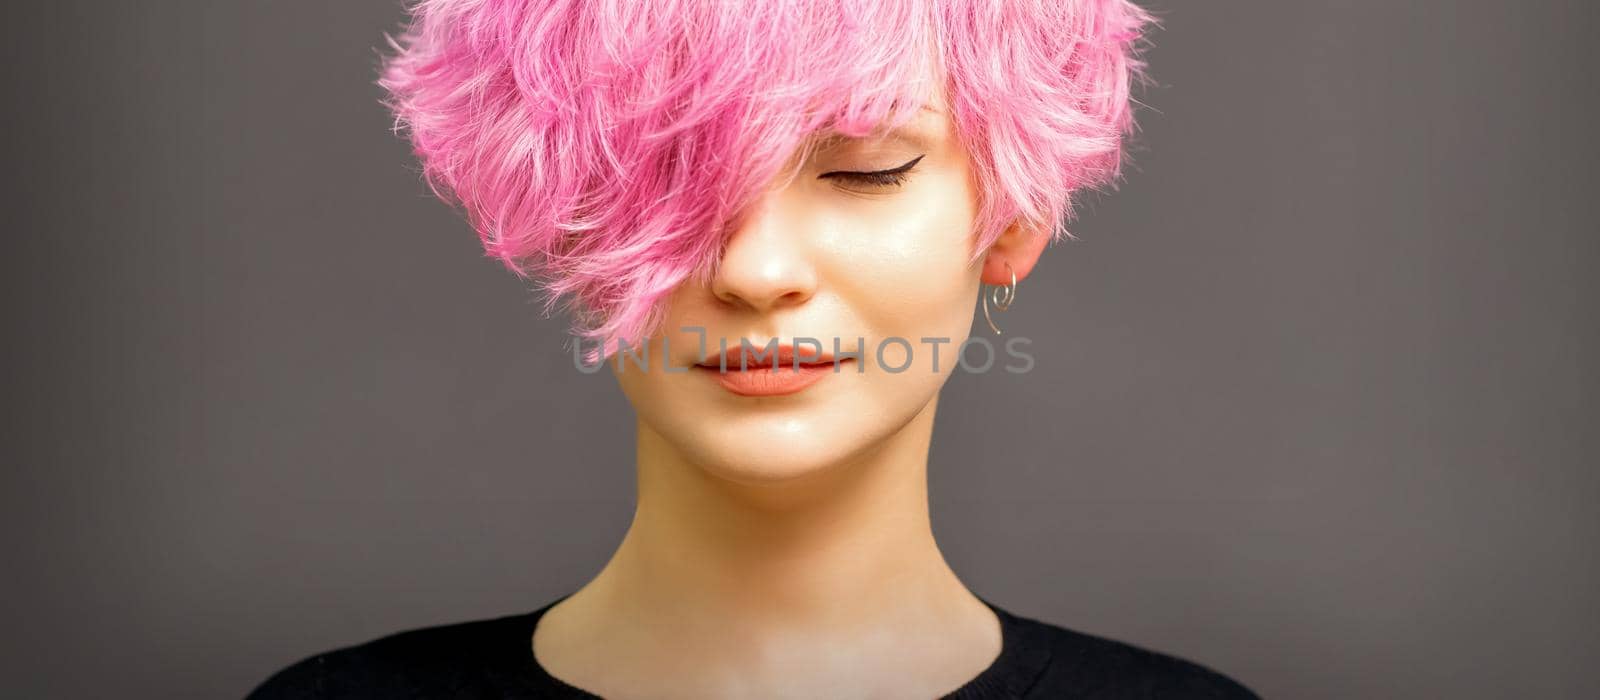 Beautiful young caucasian woman with short curly bob hairstyle dyed in pink color with closed eyes against dark gray background with copy space. by okskukuruza